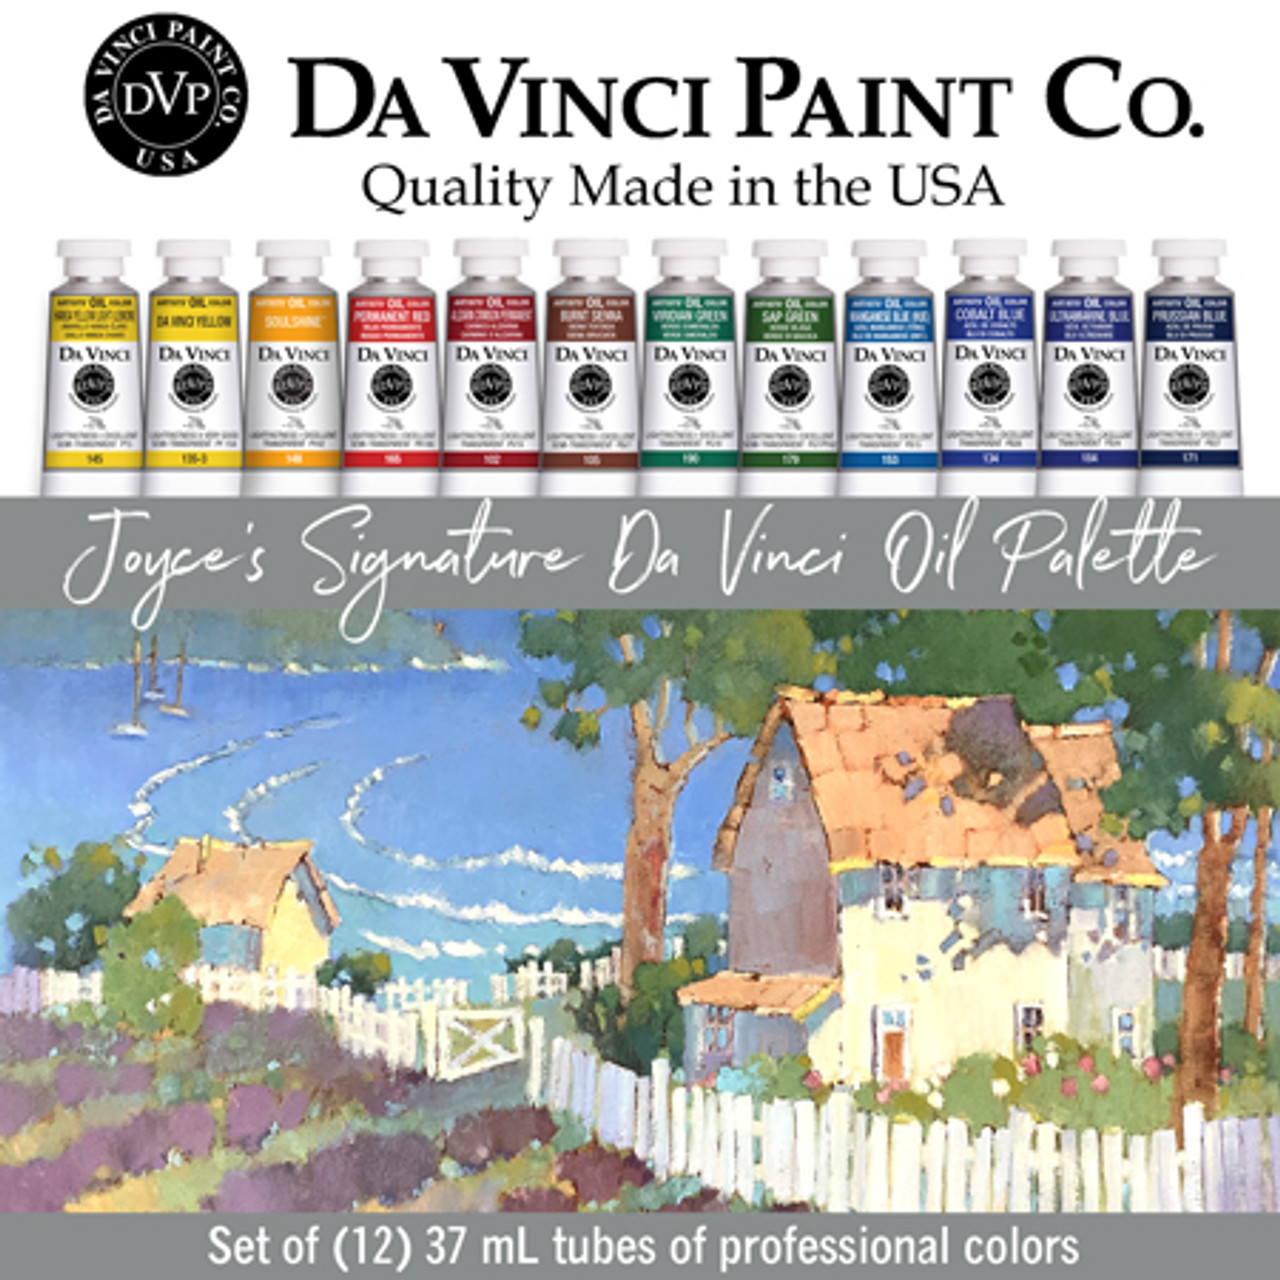 Soft Body Acrylic Paint - Set of 12, Primary Colors